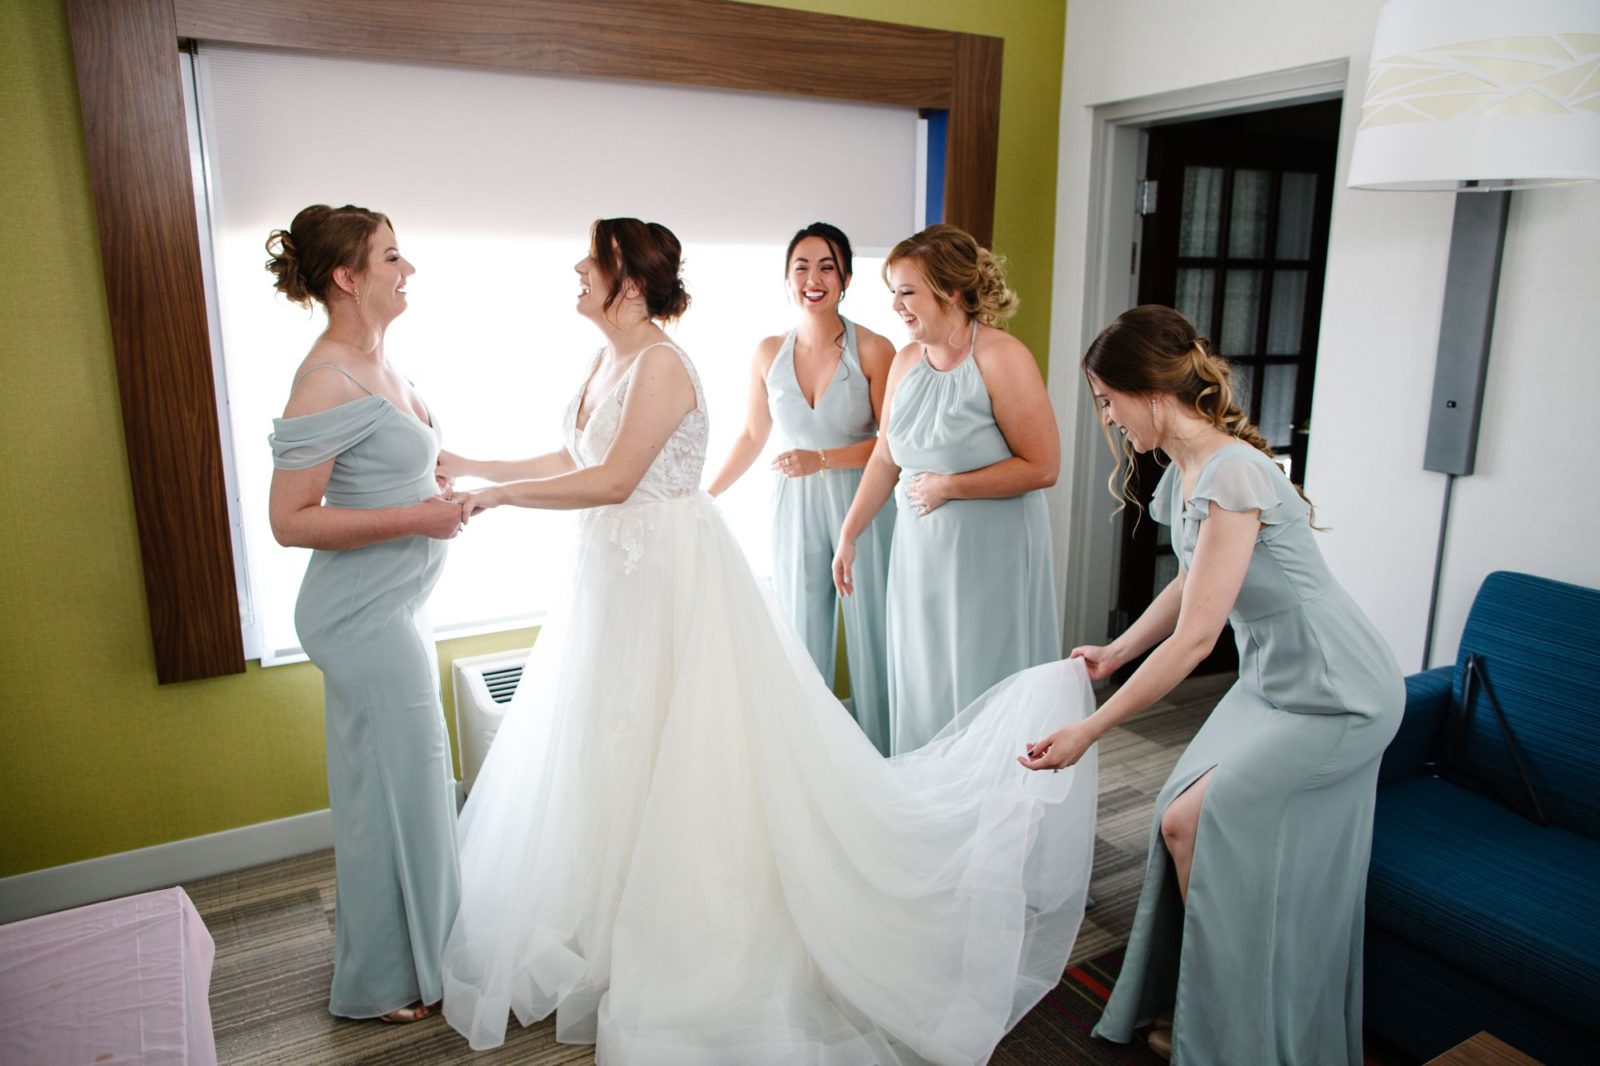 Jenny's bridesmaids are helping her get ready for her wedding at Two Brother's Roundhouse